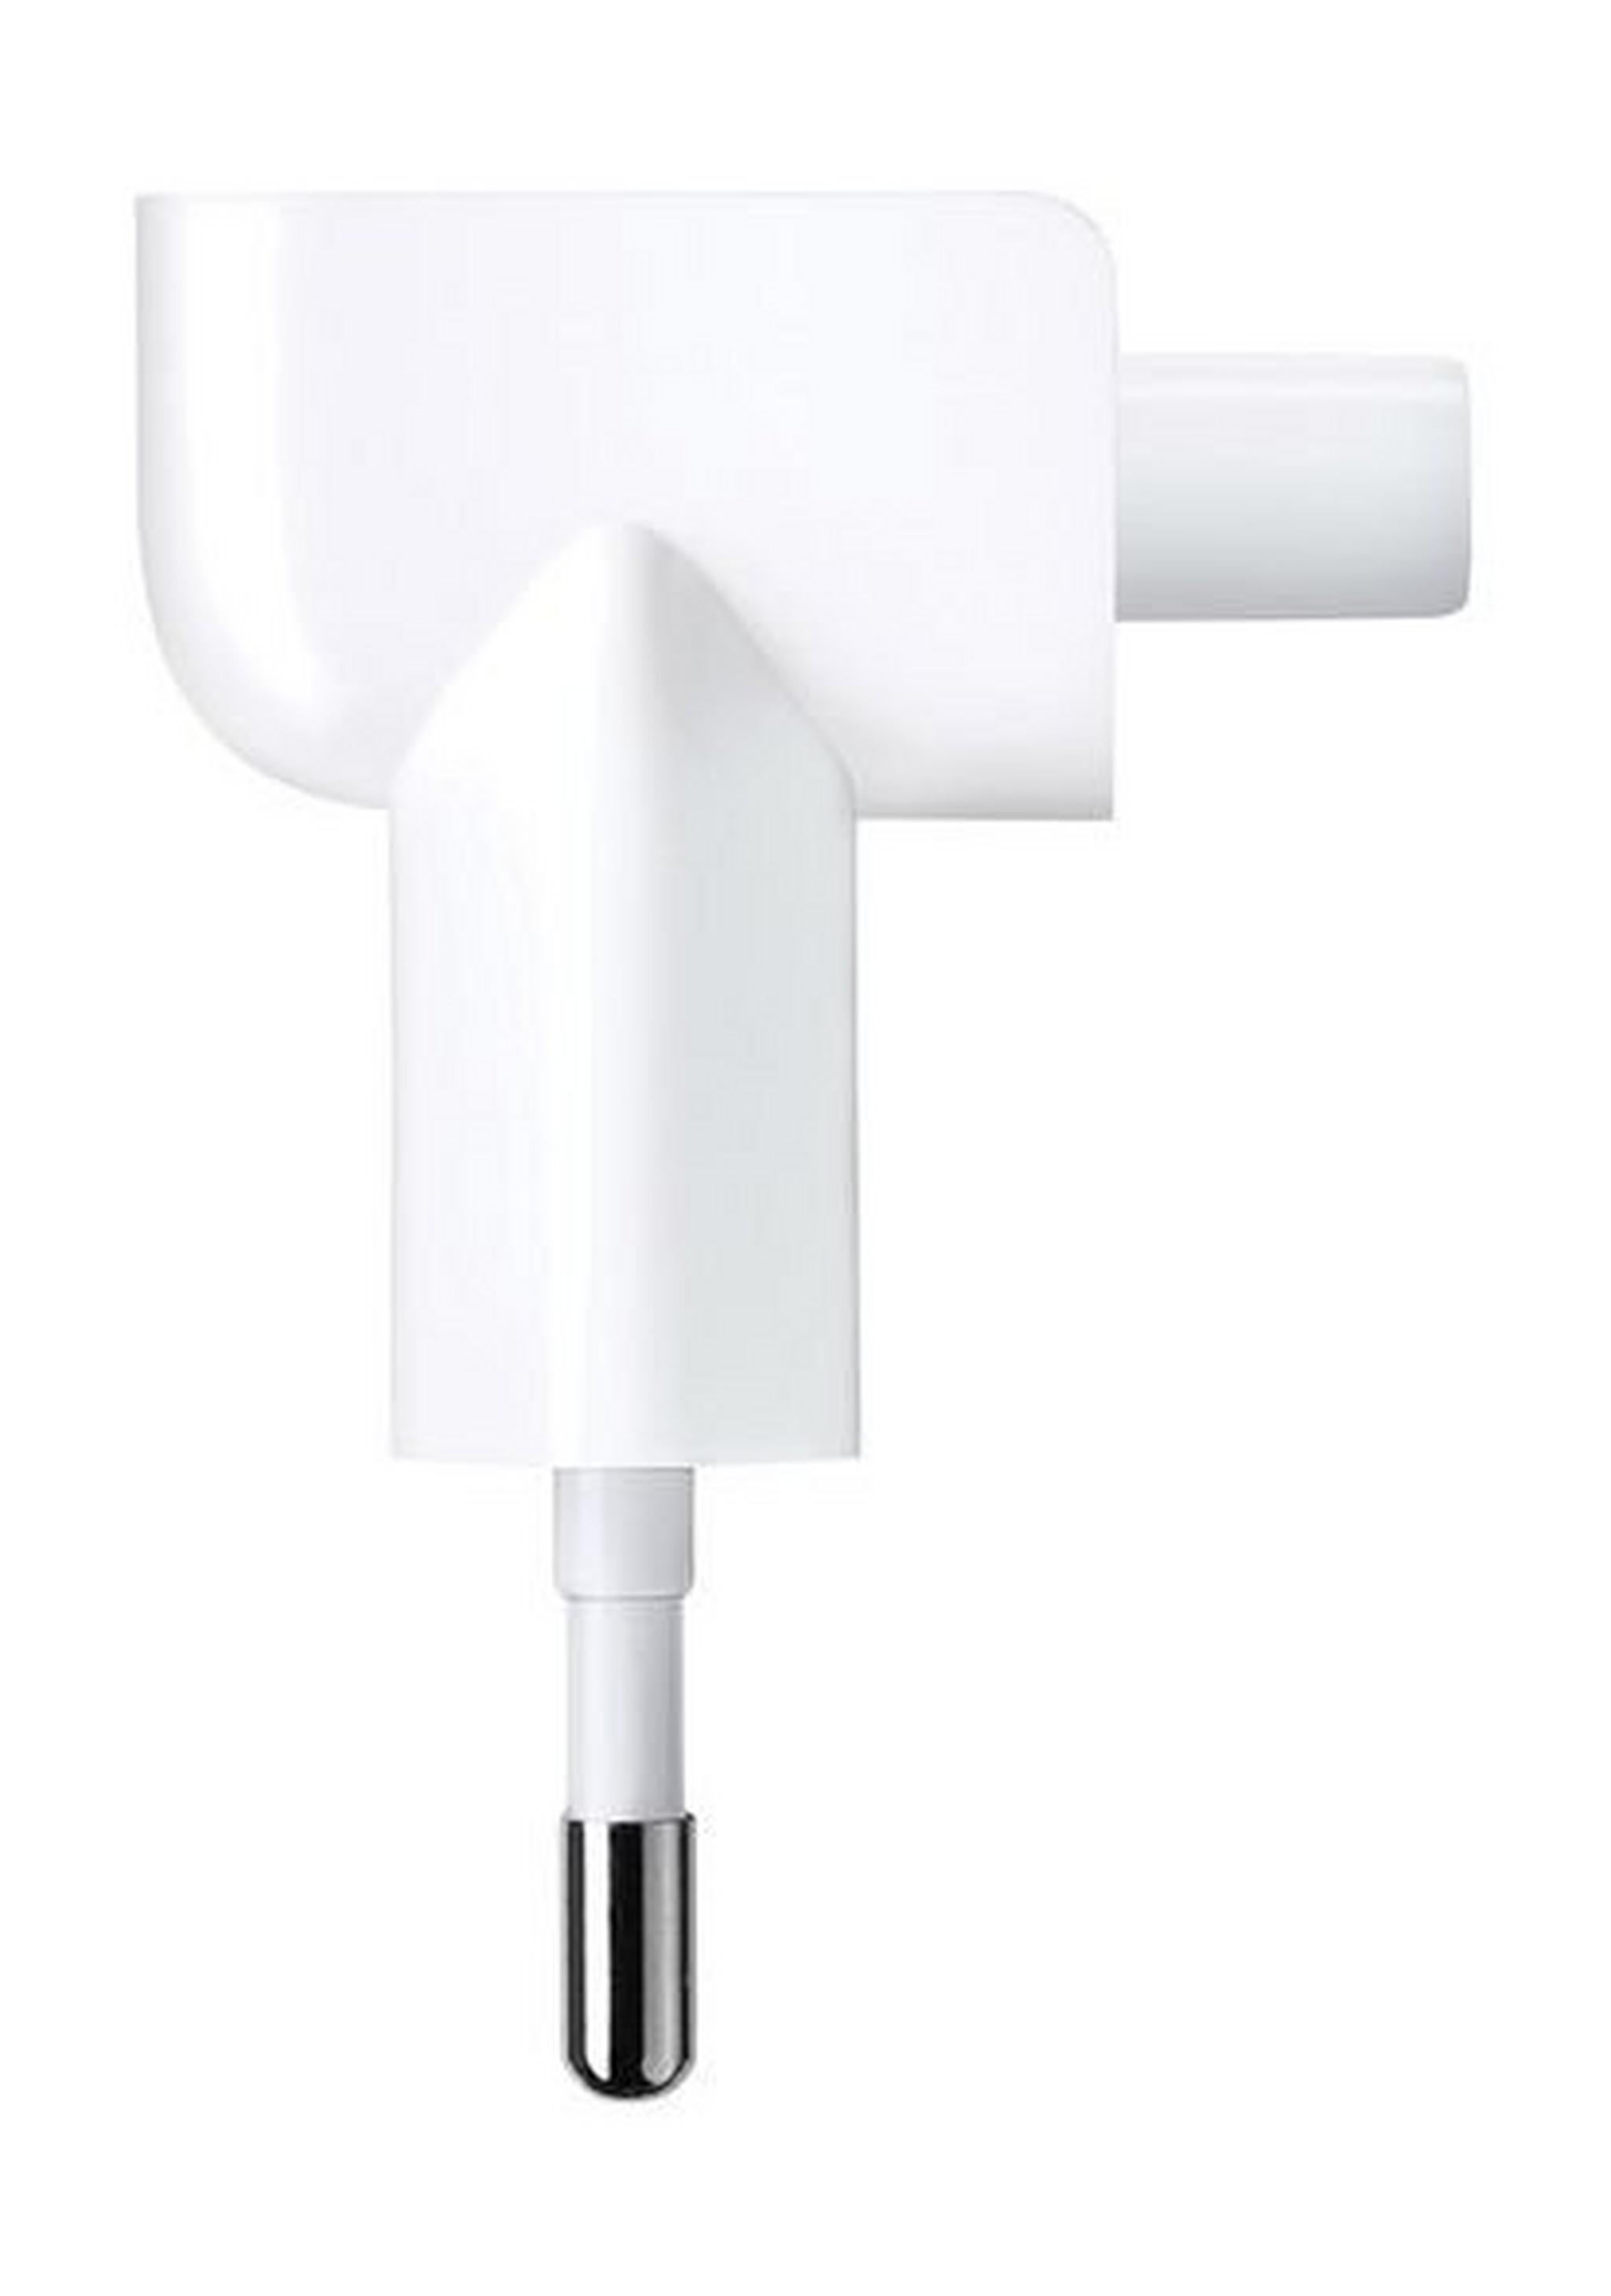 Apple World Travel Adapter Kit (MD837AM/A) - White